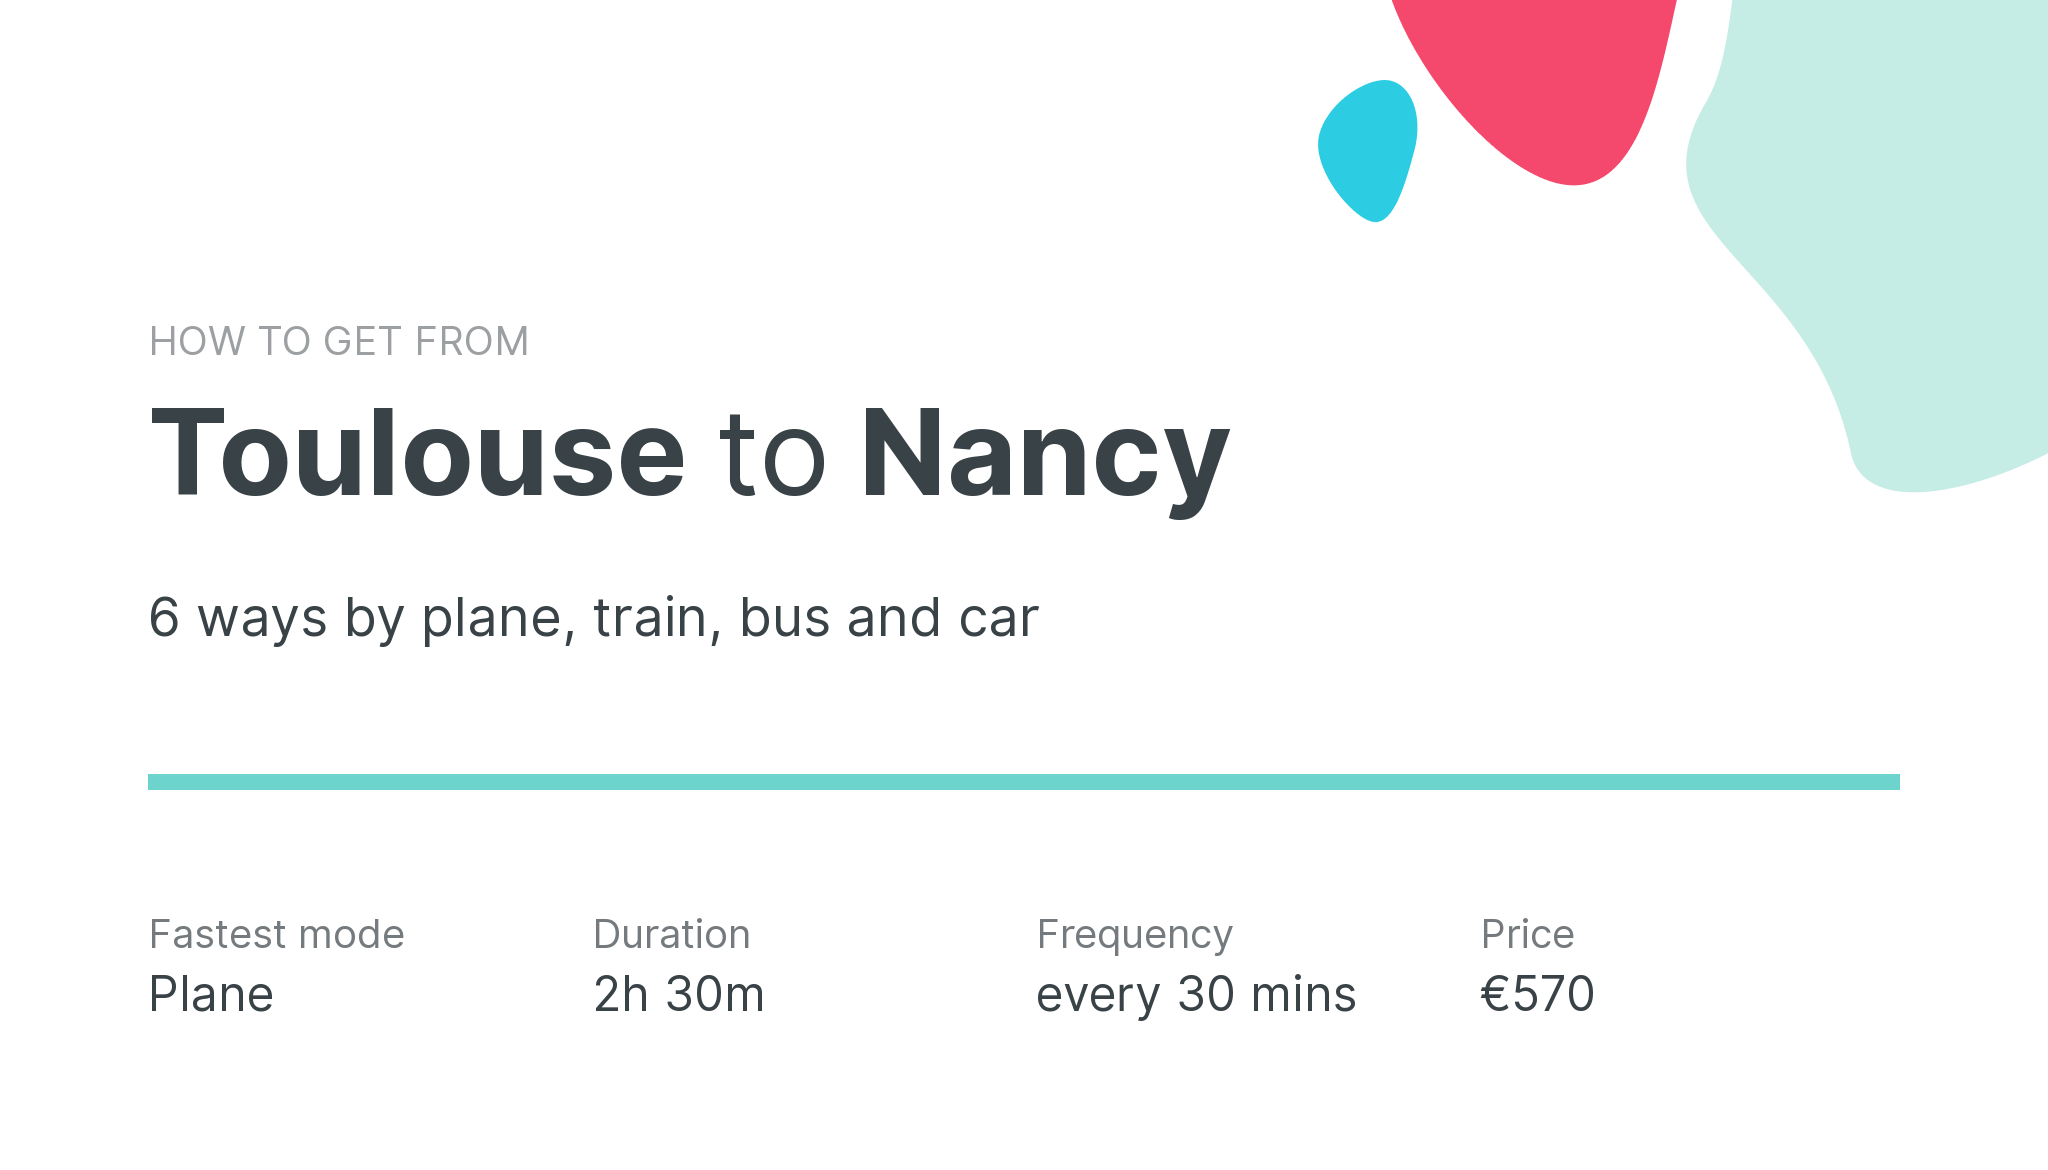 How do I get from Toulouse to Nancy